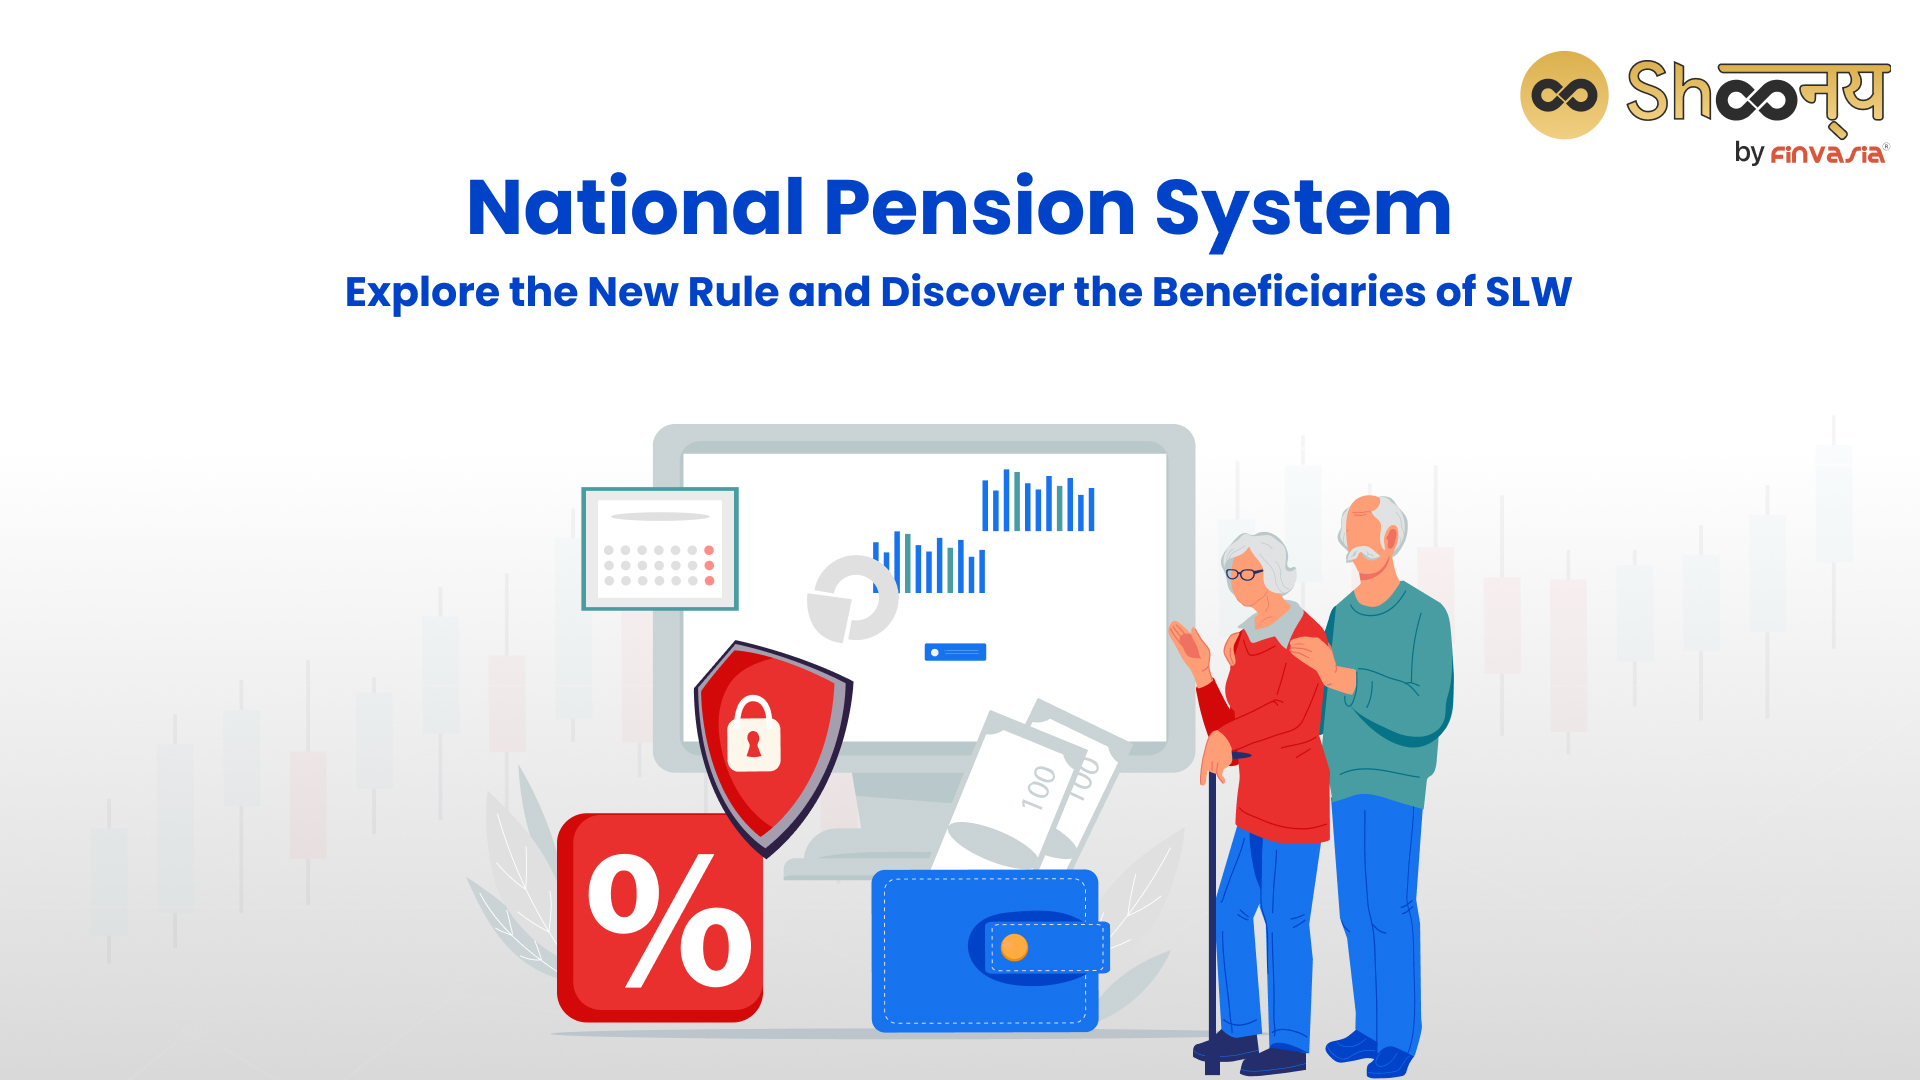 National Pension System: Explore the New Rule